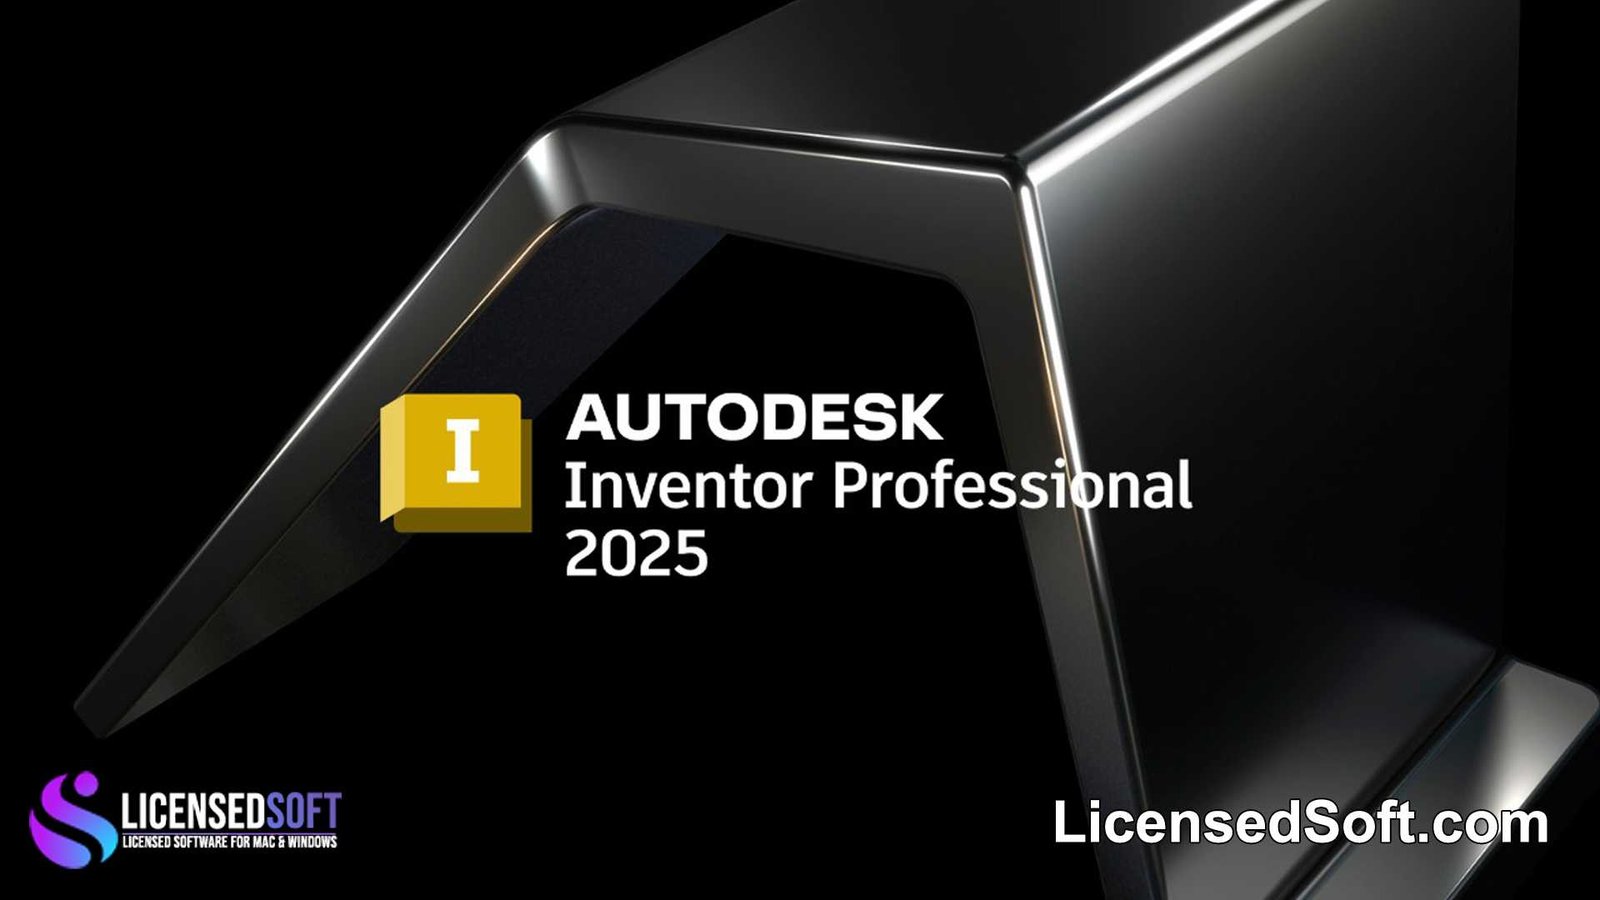 Autodesk Inventor Professional 2025 By LicensedSoft